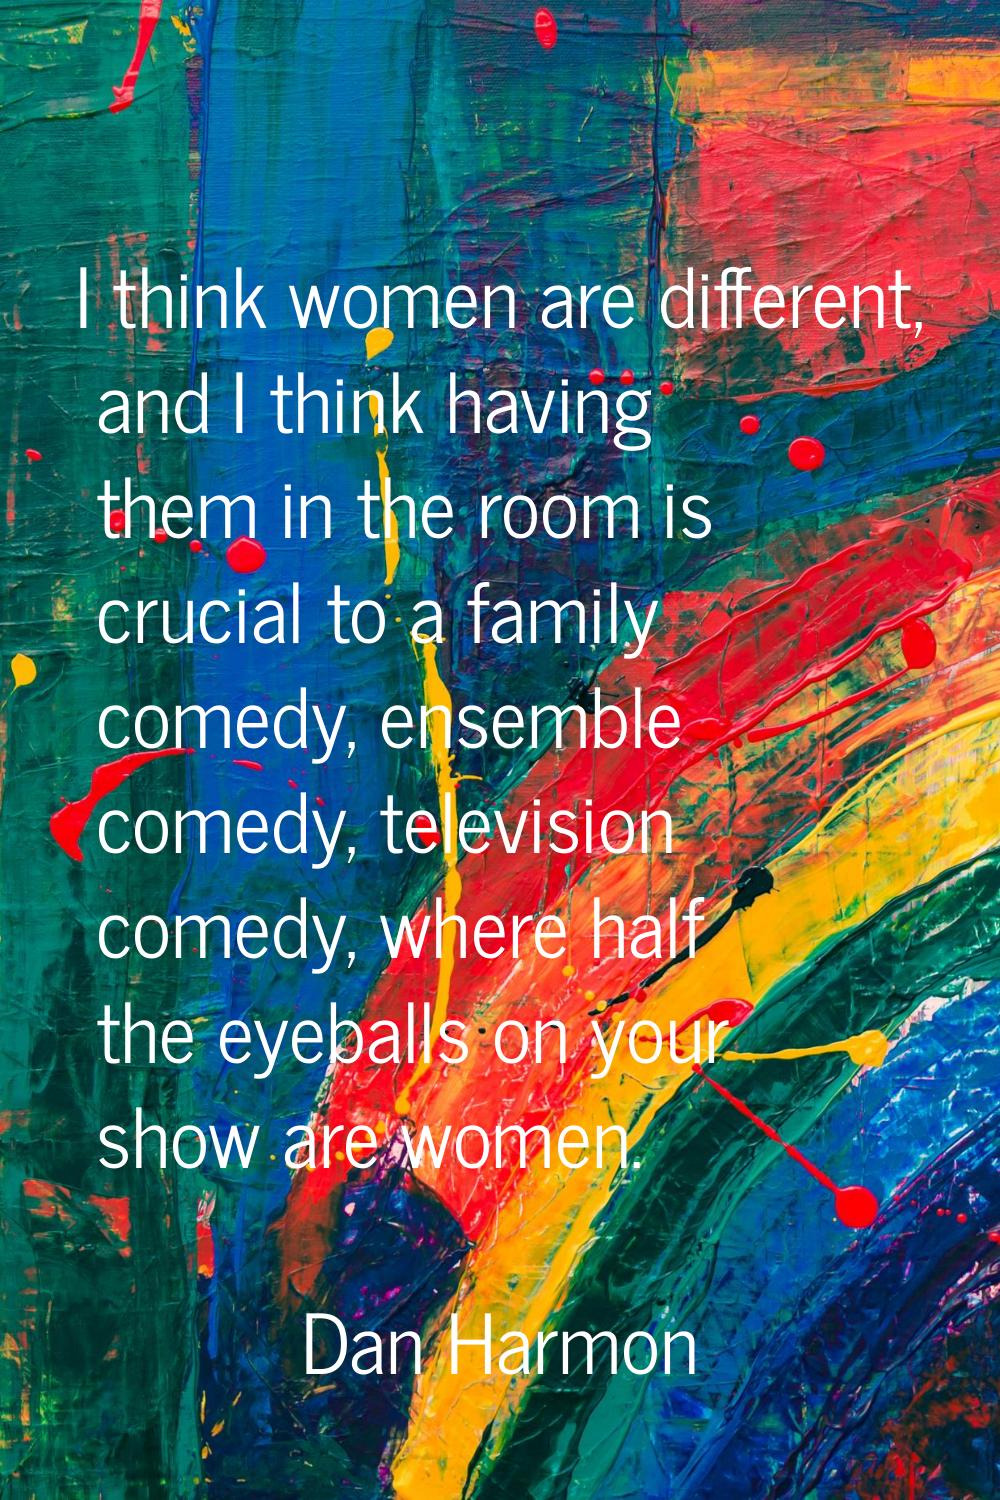 I think women are different, and I think having them in the room is crucial to a family comedy, ens